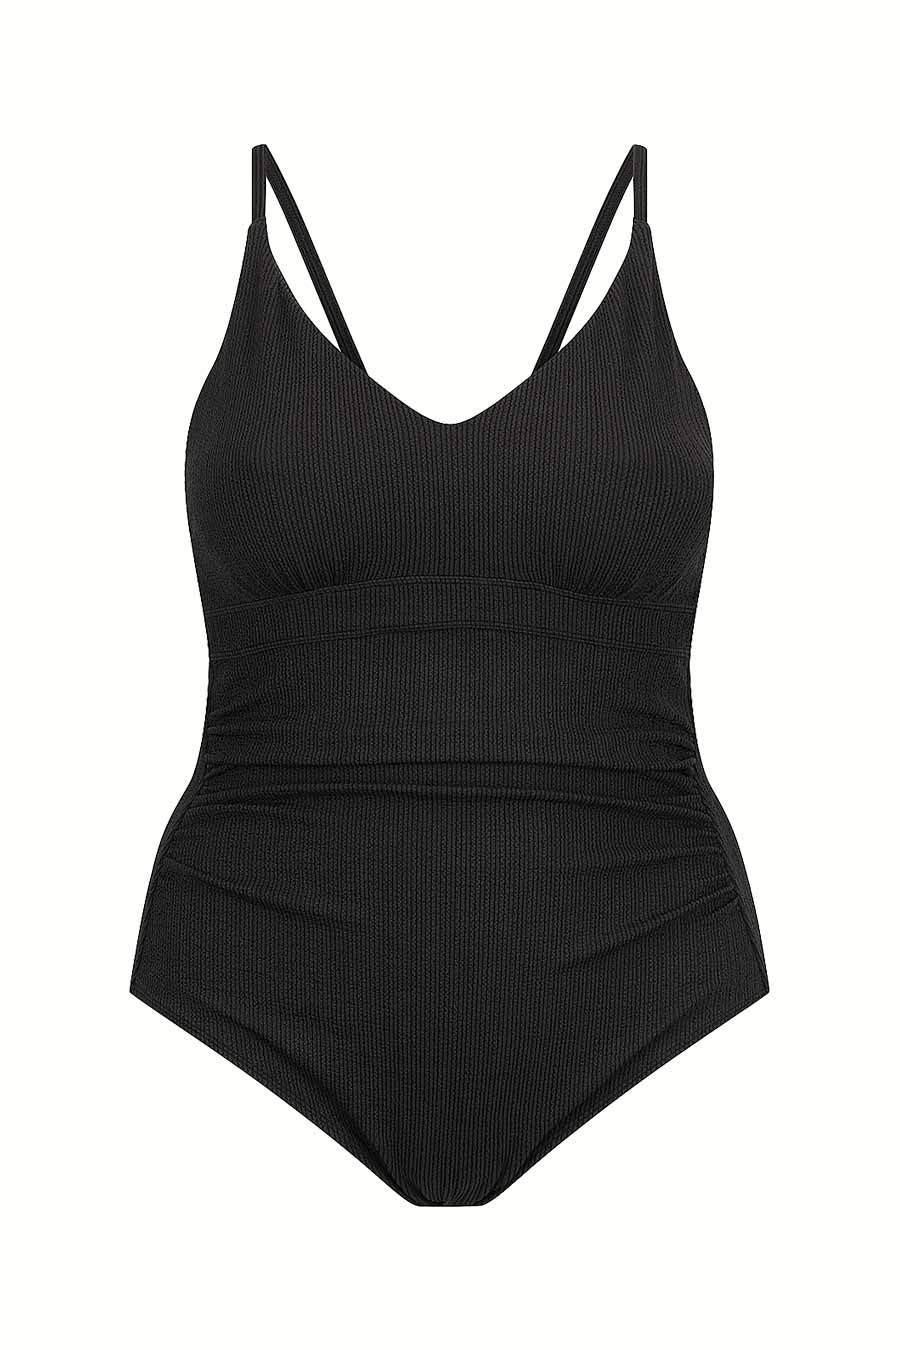 Core Support One Piece Swim - Black Texture from Active Truth™
